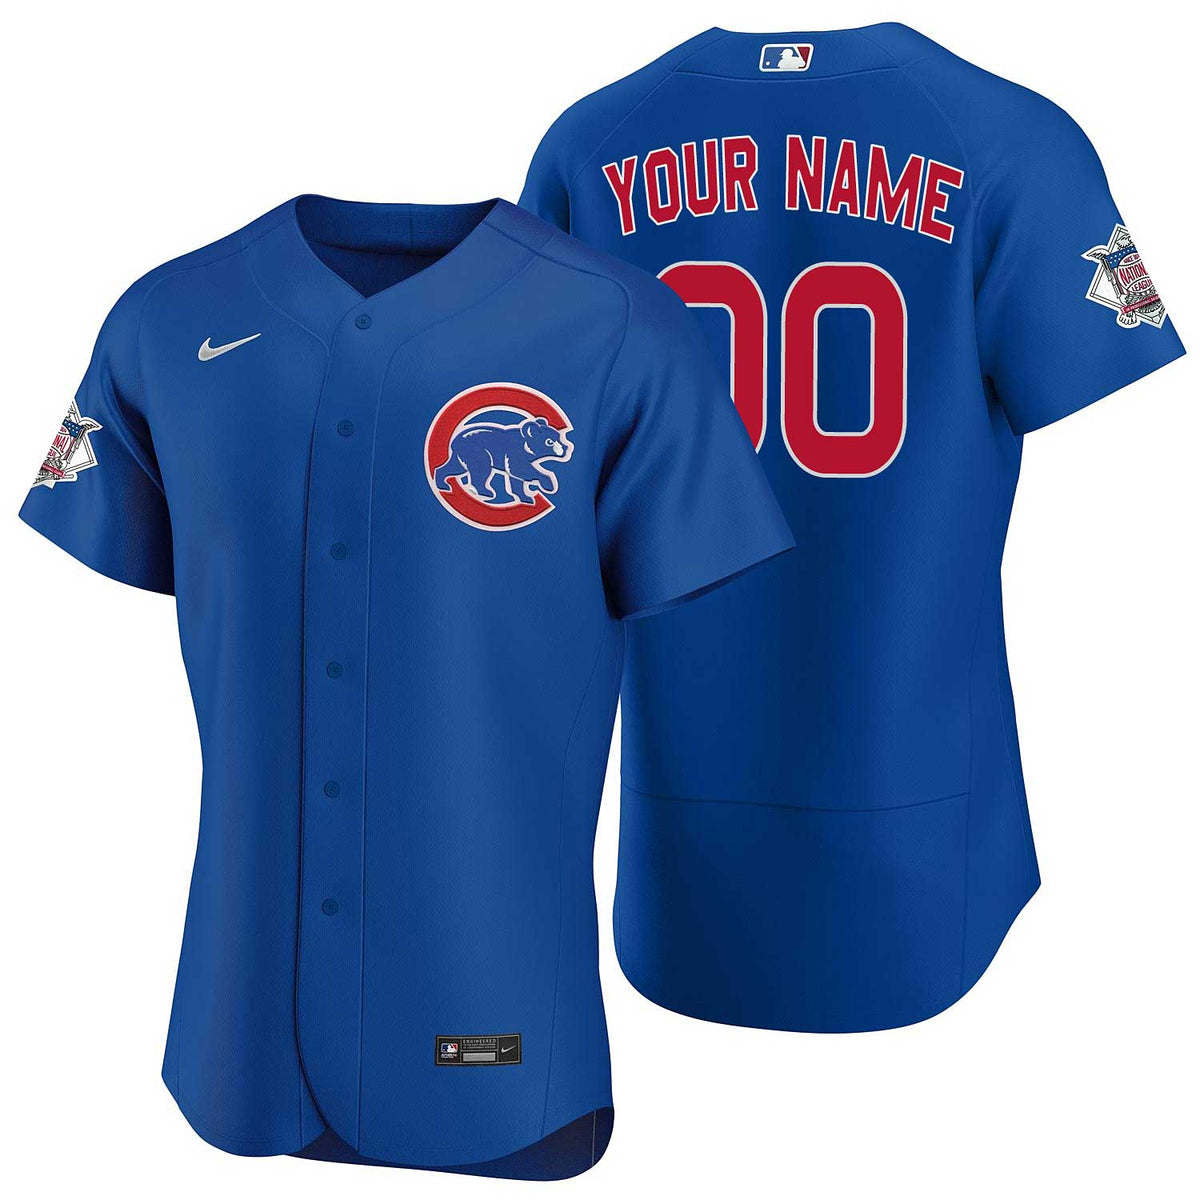 Men's Chicago Cubs Nike Royal Alternate Authentic Team Jersey